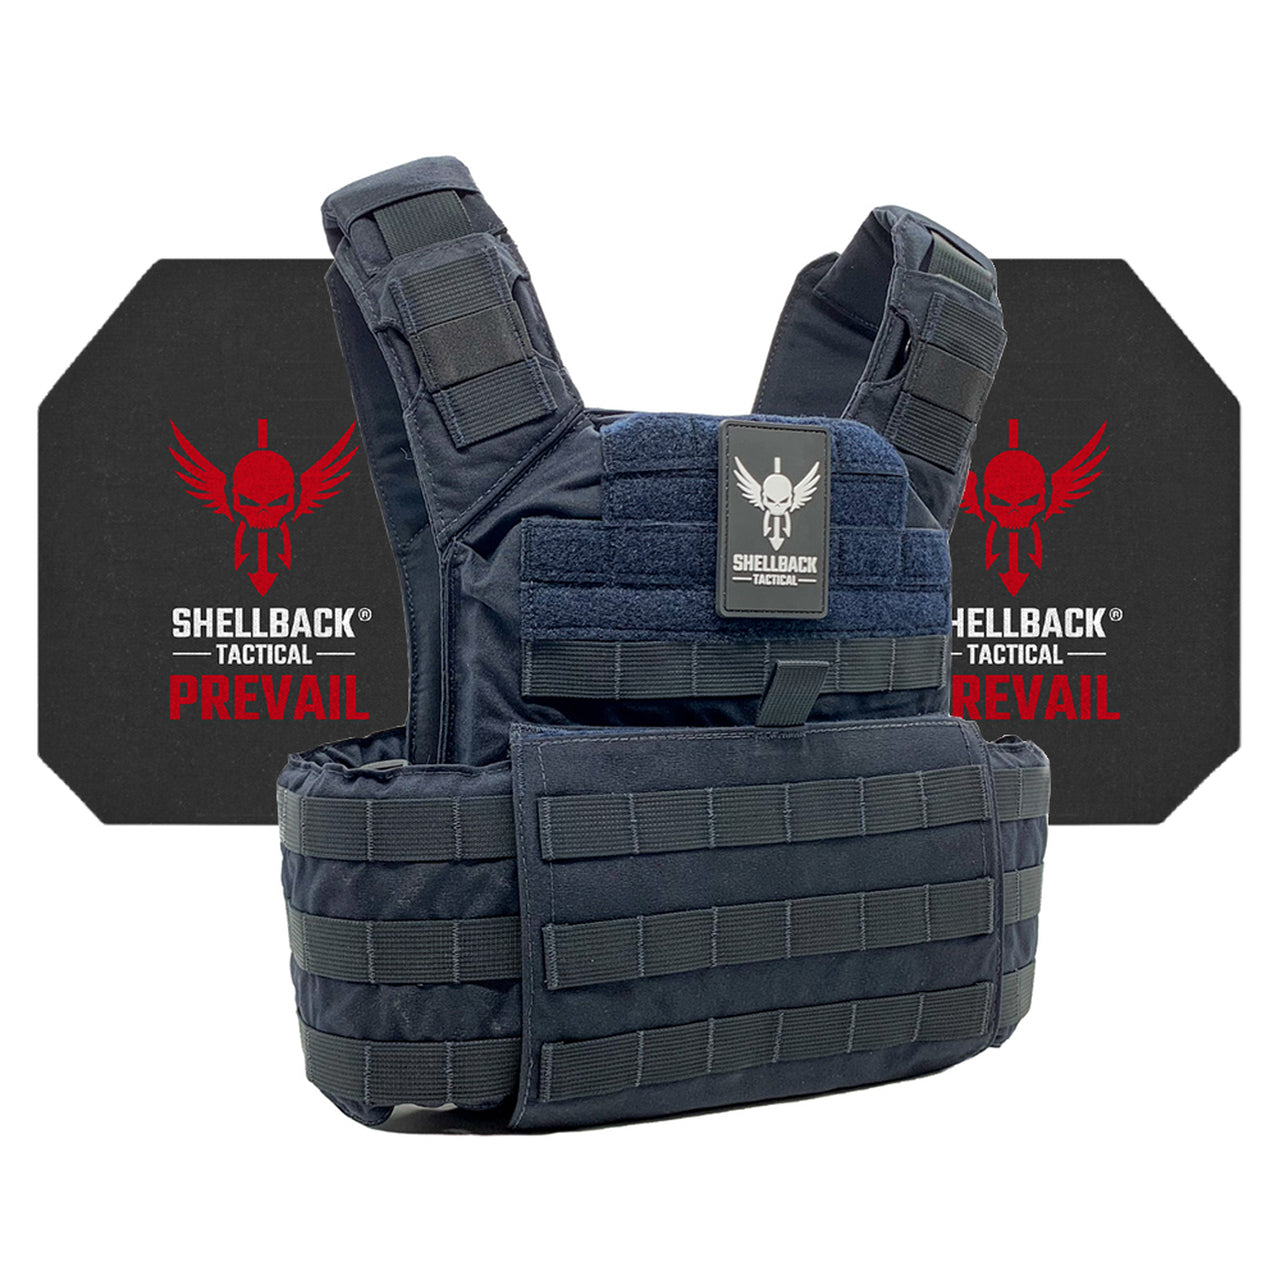 A Shellback Tactical Banshee Elite 2.0 Active Shooter Kit with Level IV Model 4S17 Armor Plates with the Shellback Tactical logo on it.